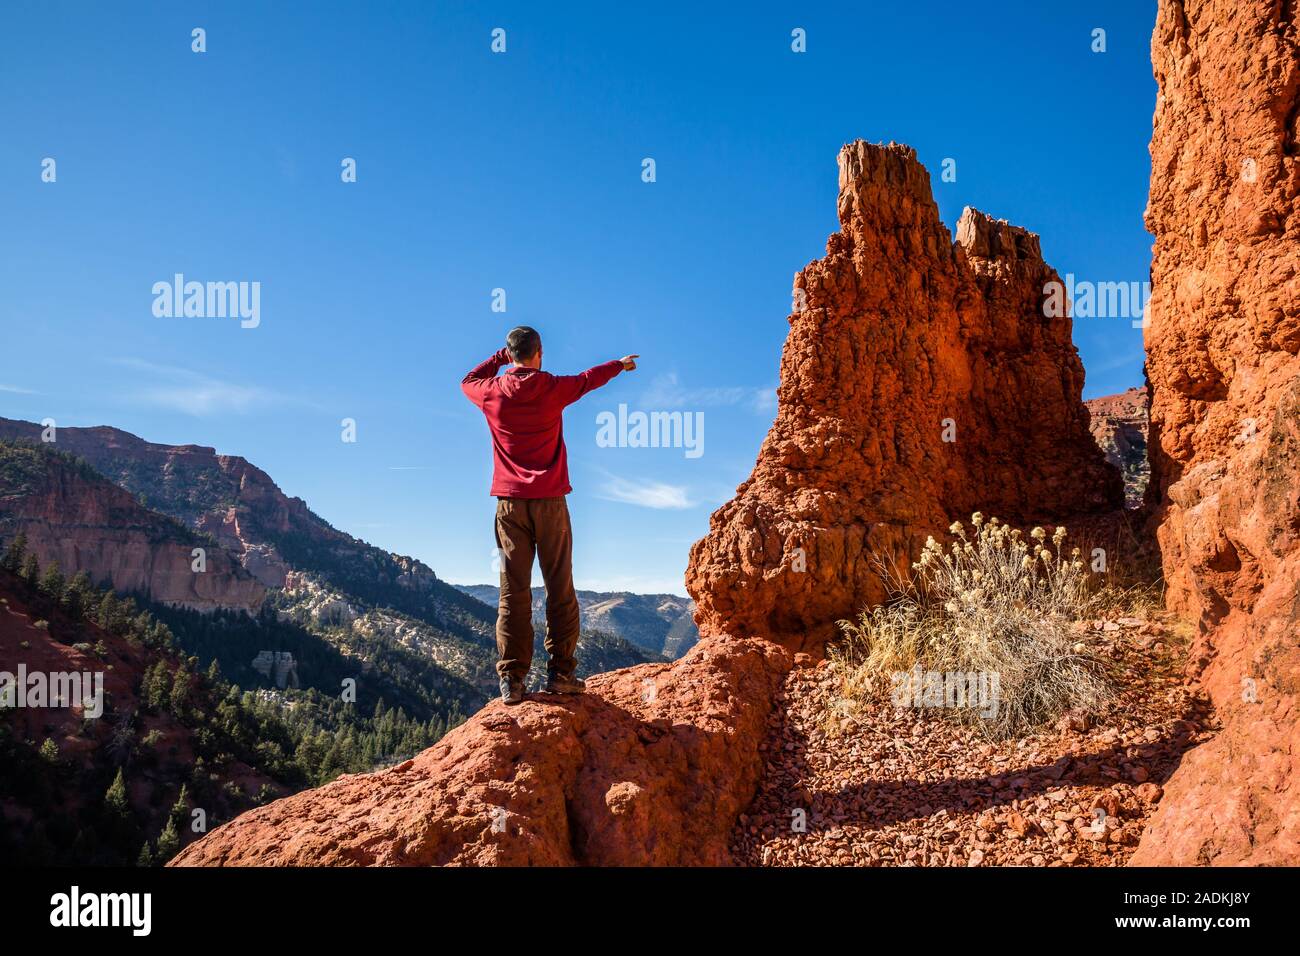 Man in a ared jacket among red rock hoodoo formations pointing at the view down canyon in the Utah desert. Stock Photo